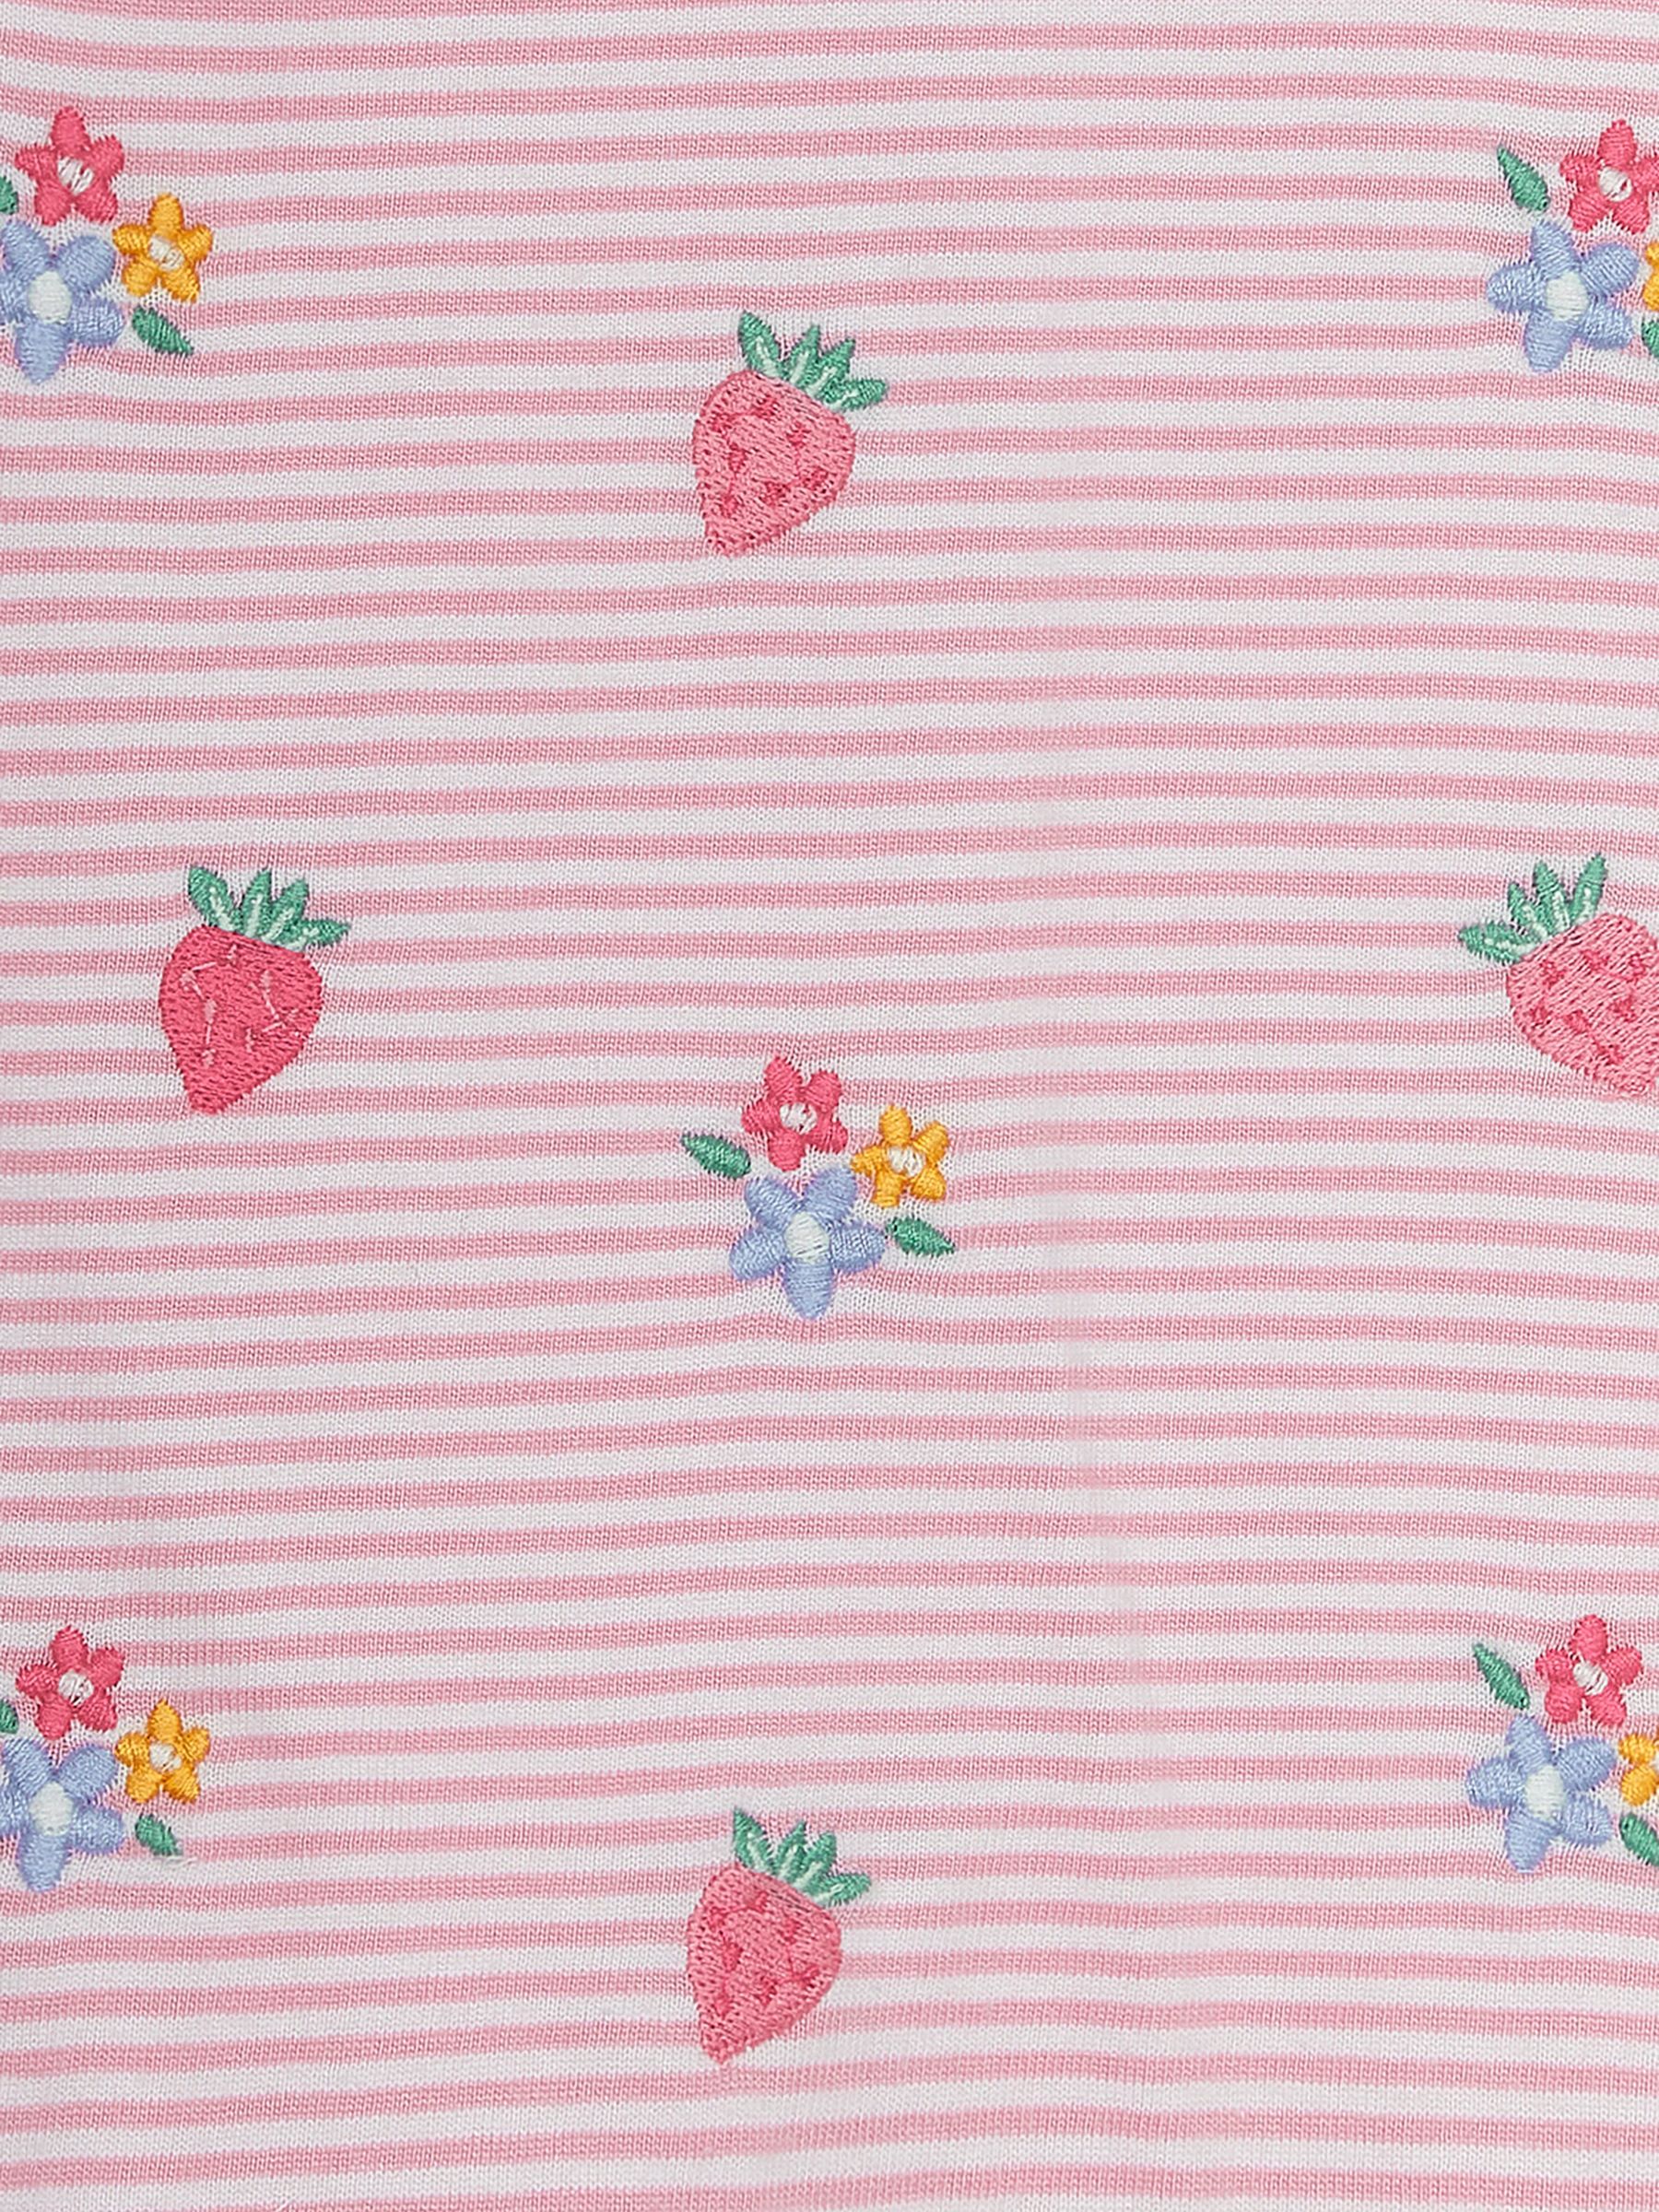 JoJo Maman Bébé Baby Strawberry Floral Embroidered Stripe T-Shirt, Pink/Multi, 2-3 years